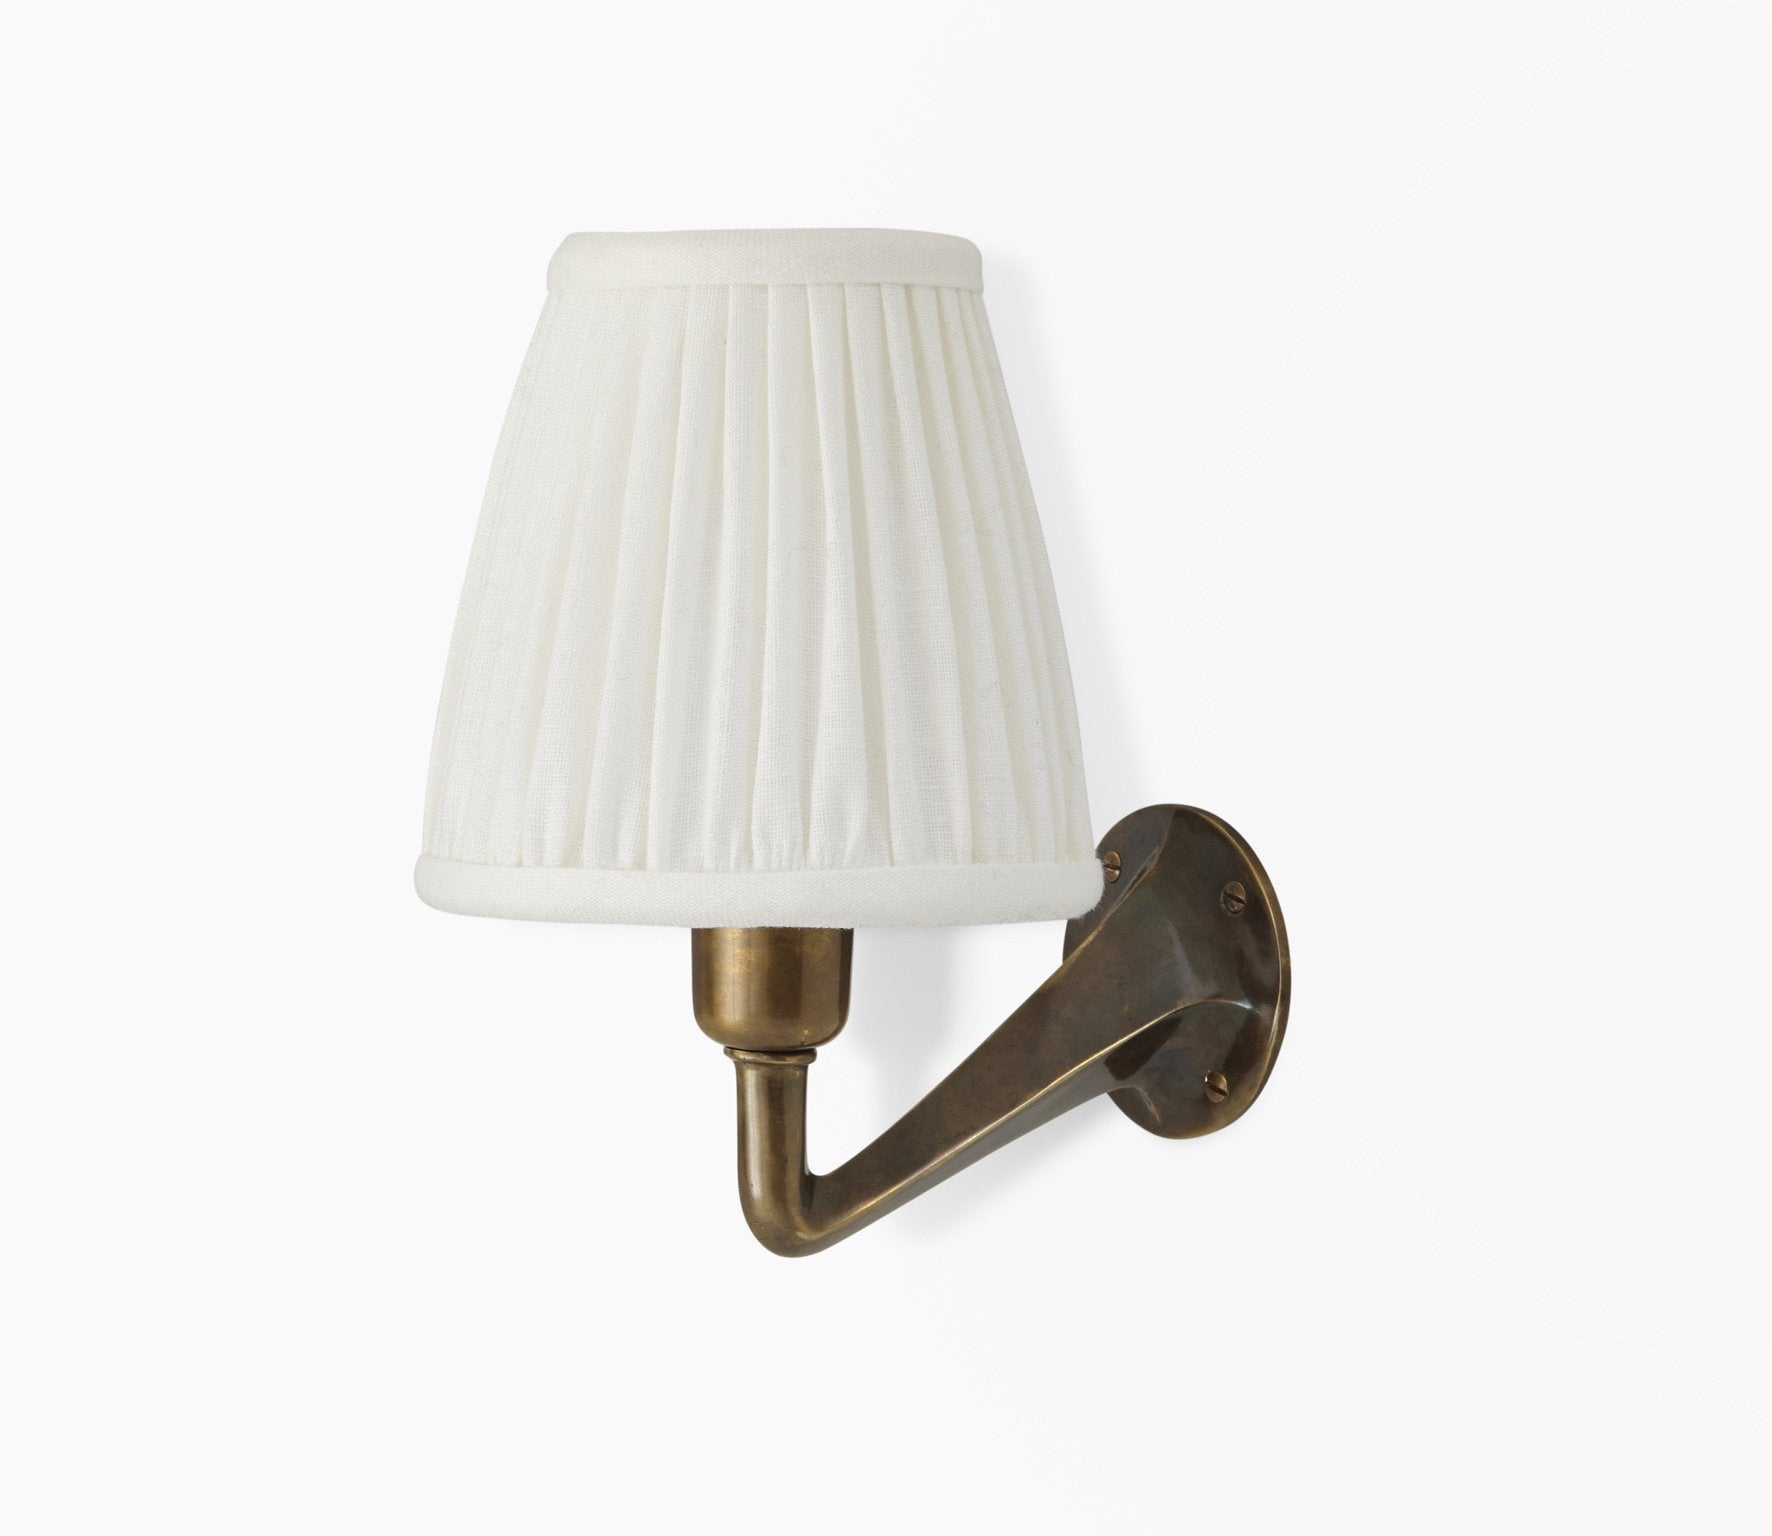 Leila Wall Light with Gathered Empire Shade Product Image 2